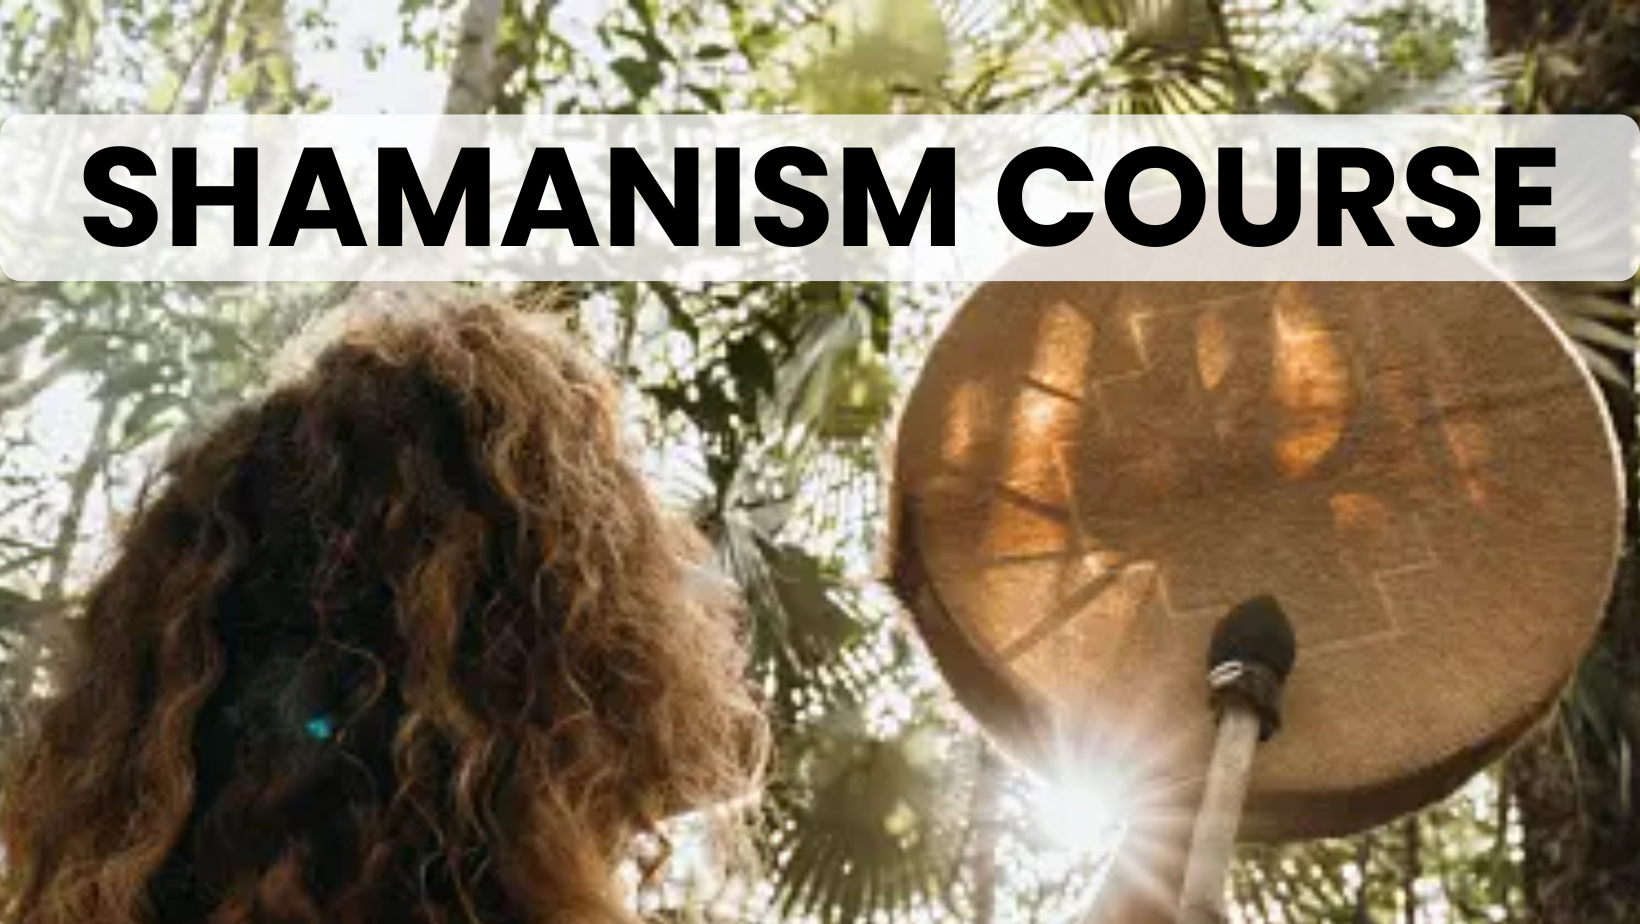 Shamanism Courses in Chennai